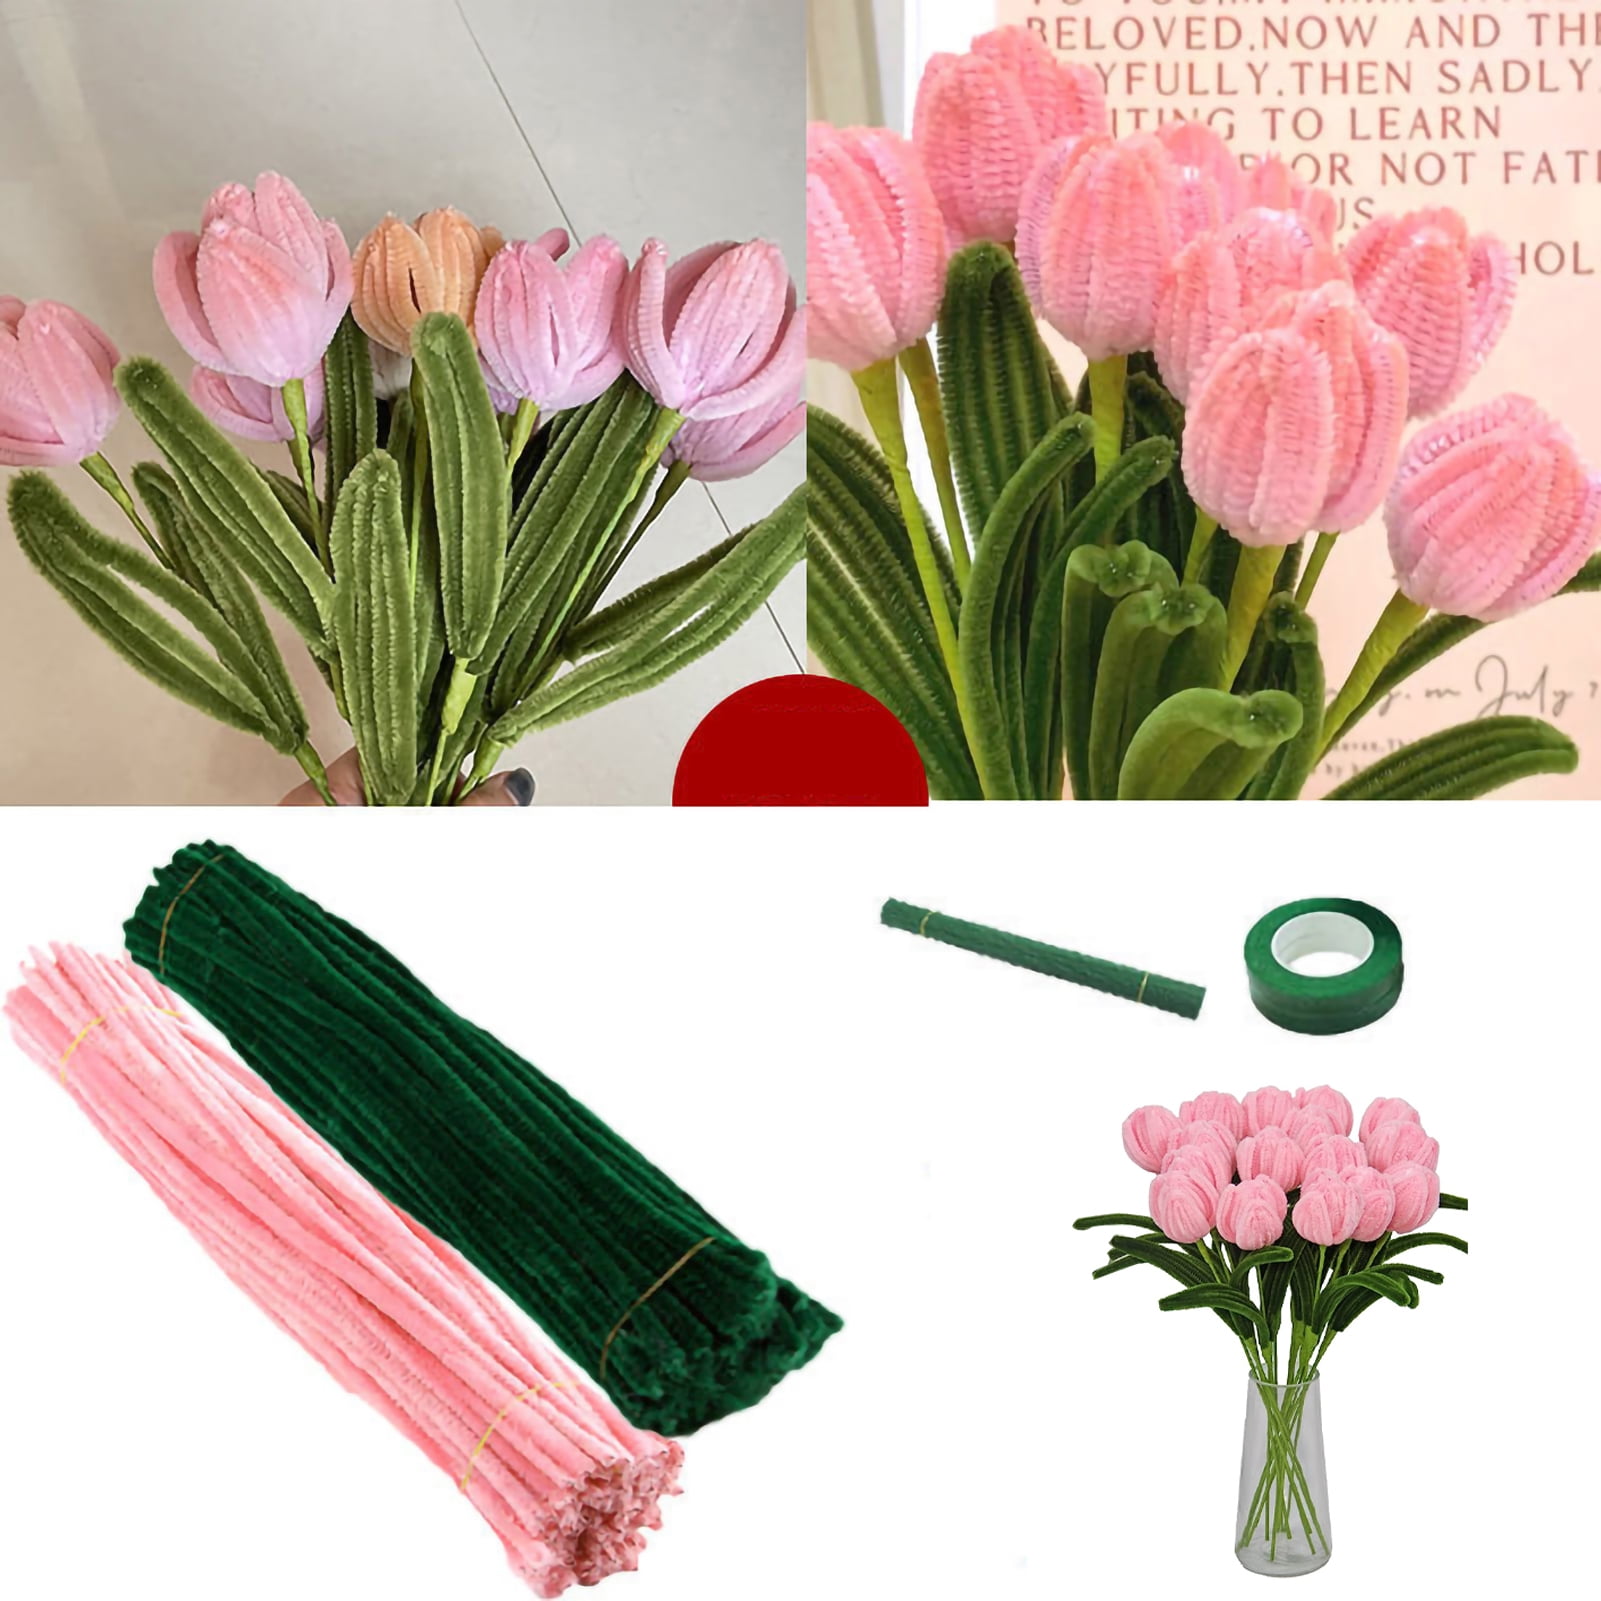 Cldamecy 200 pcs Purple OliveGreen Pipe Cleaners Set with Floral Wires &  Gardening Tape, Chenille Stems Pipecleaners for Tulip Bouquet Making,Kids  DIY